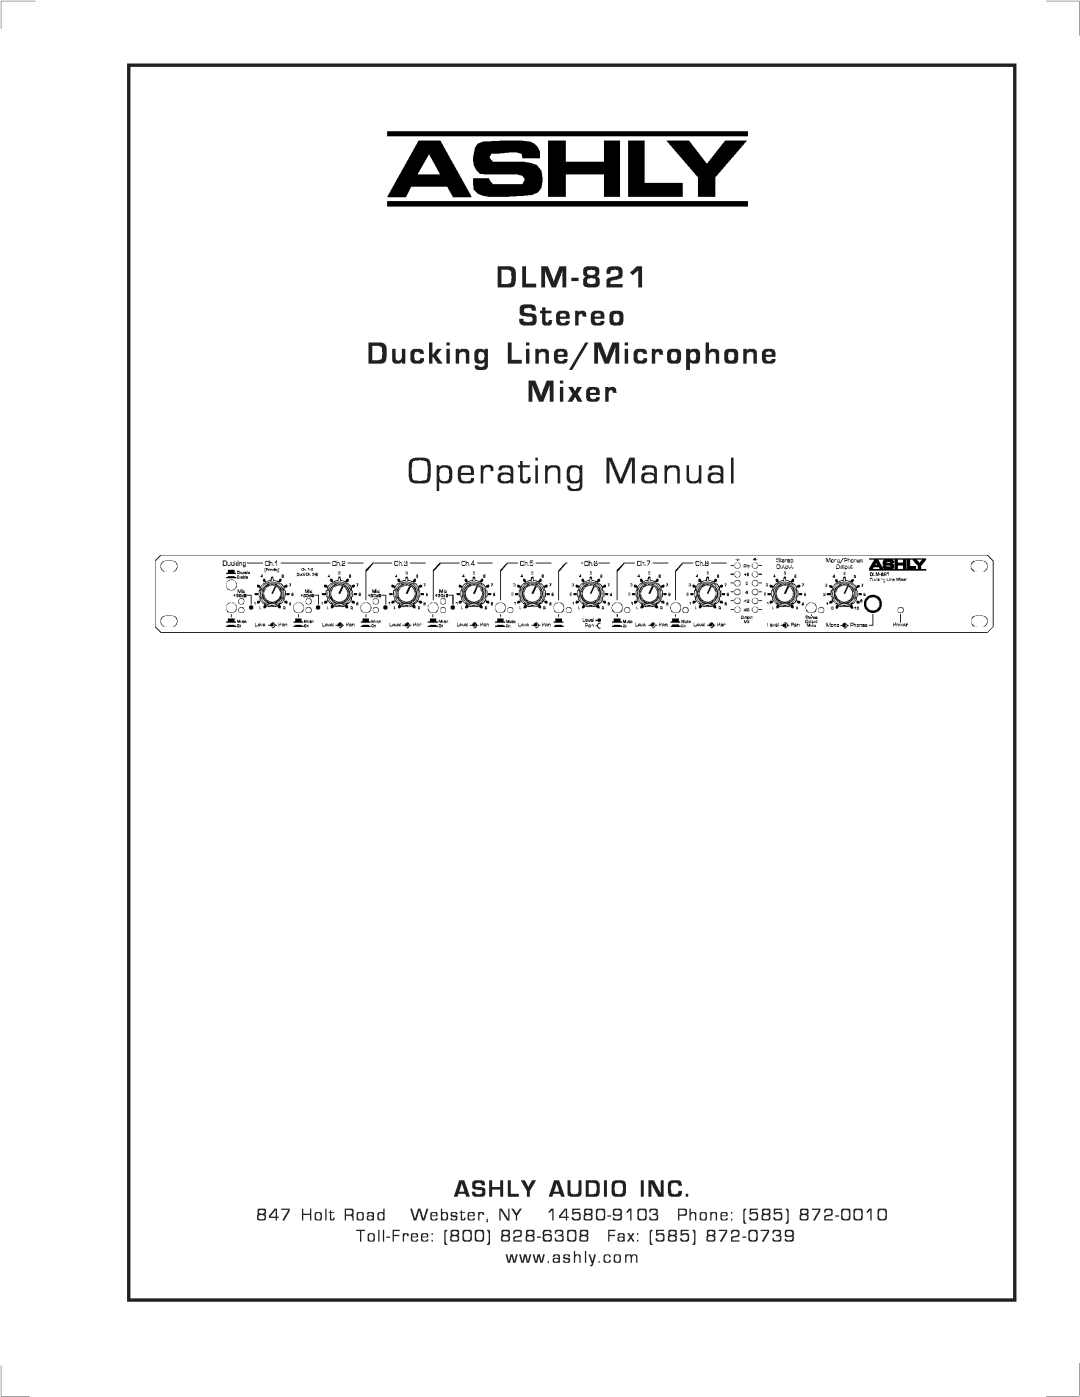 Ashly DLM-821 manual Holt Road, Webster, NY 14580-9103 Phone 585, Toll-Free 800 828-6308 Fax 585, www .ashly. com, Stereo 